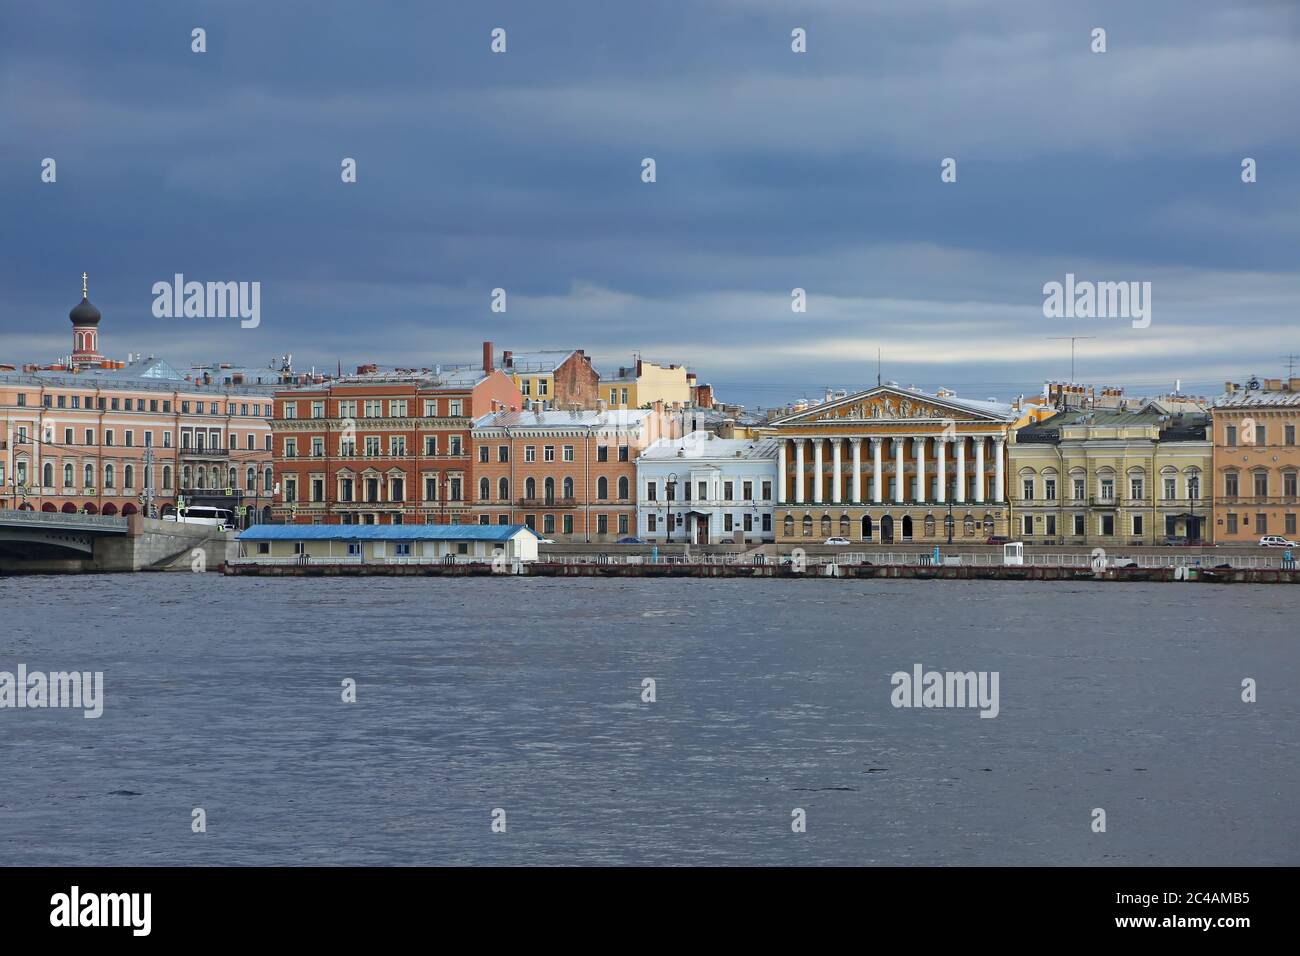 View accross the Neva river, which is one of the main waterways of the city, and historic colurful buildings on the other side, St Petersburg, Russia. Stock Photo